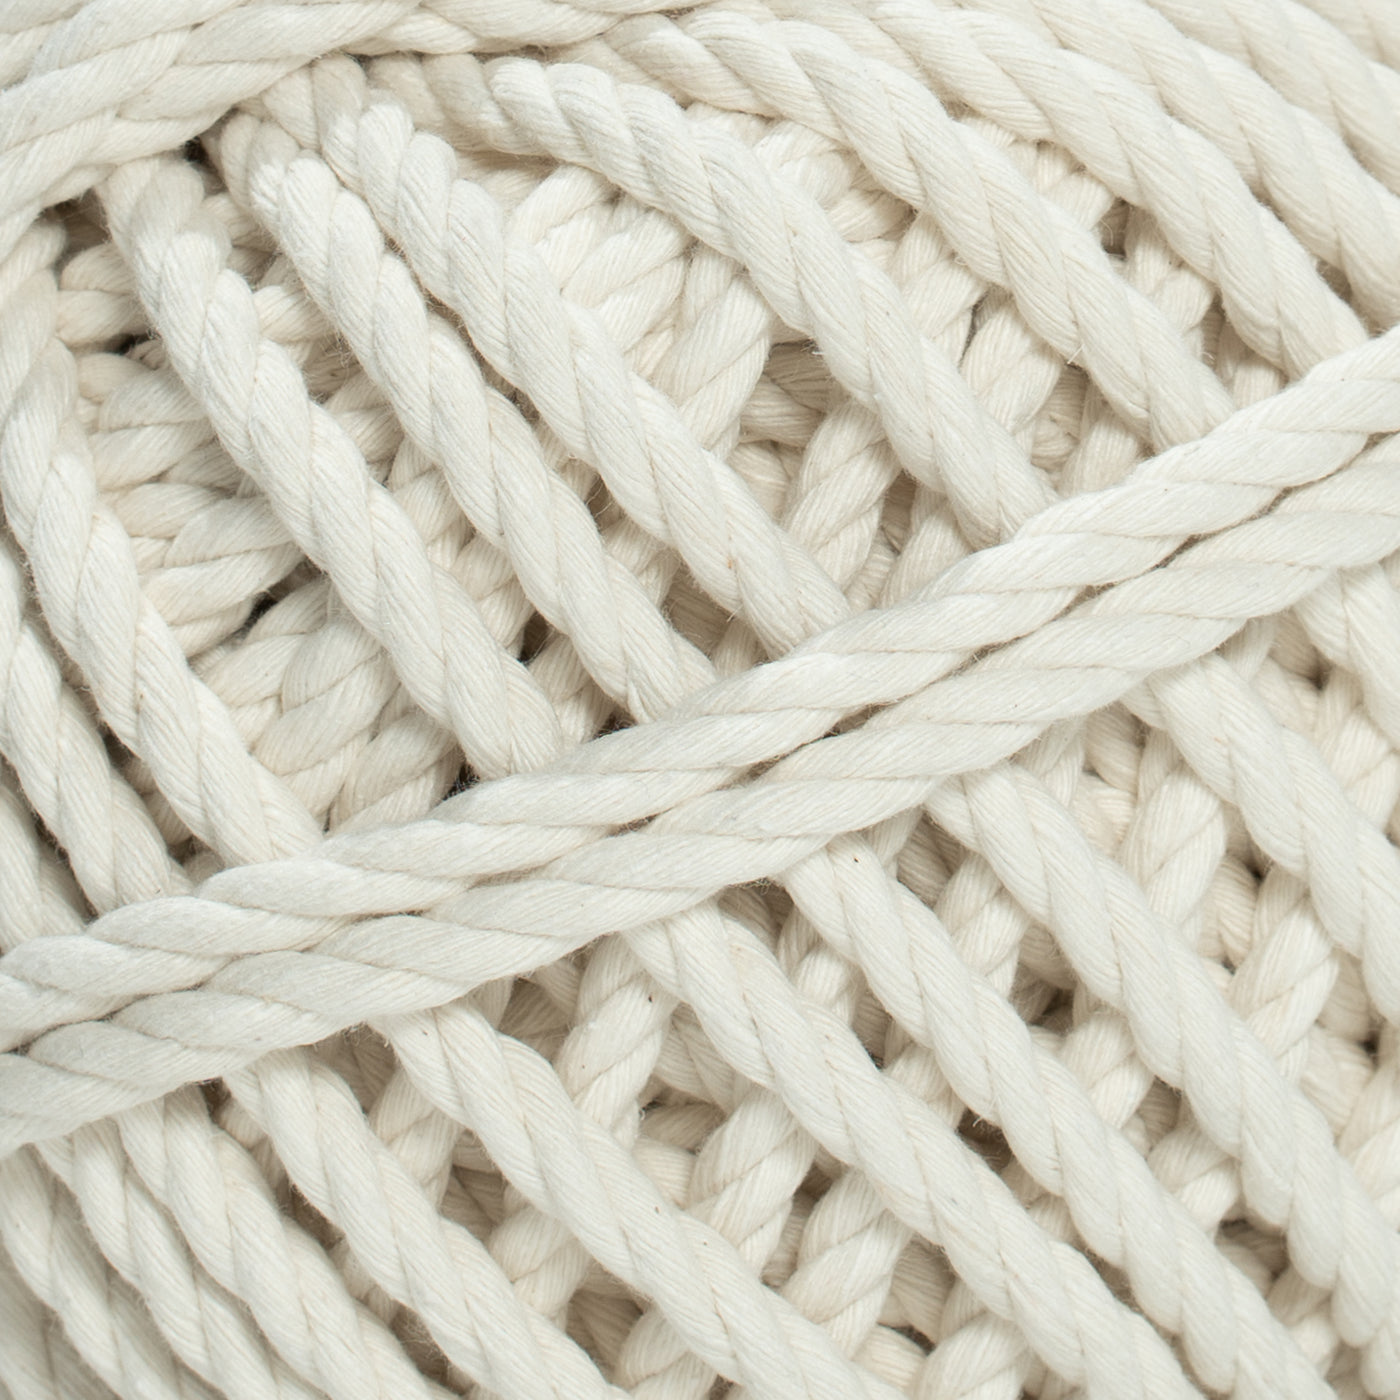 COTTON ROPE ZERO WASTE 7 MM - 3 PLY - NATURAL COLOR